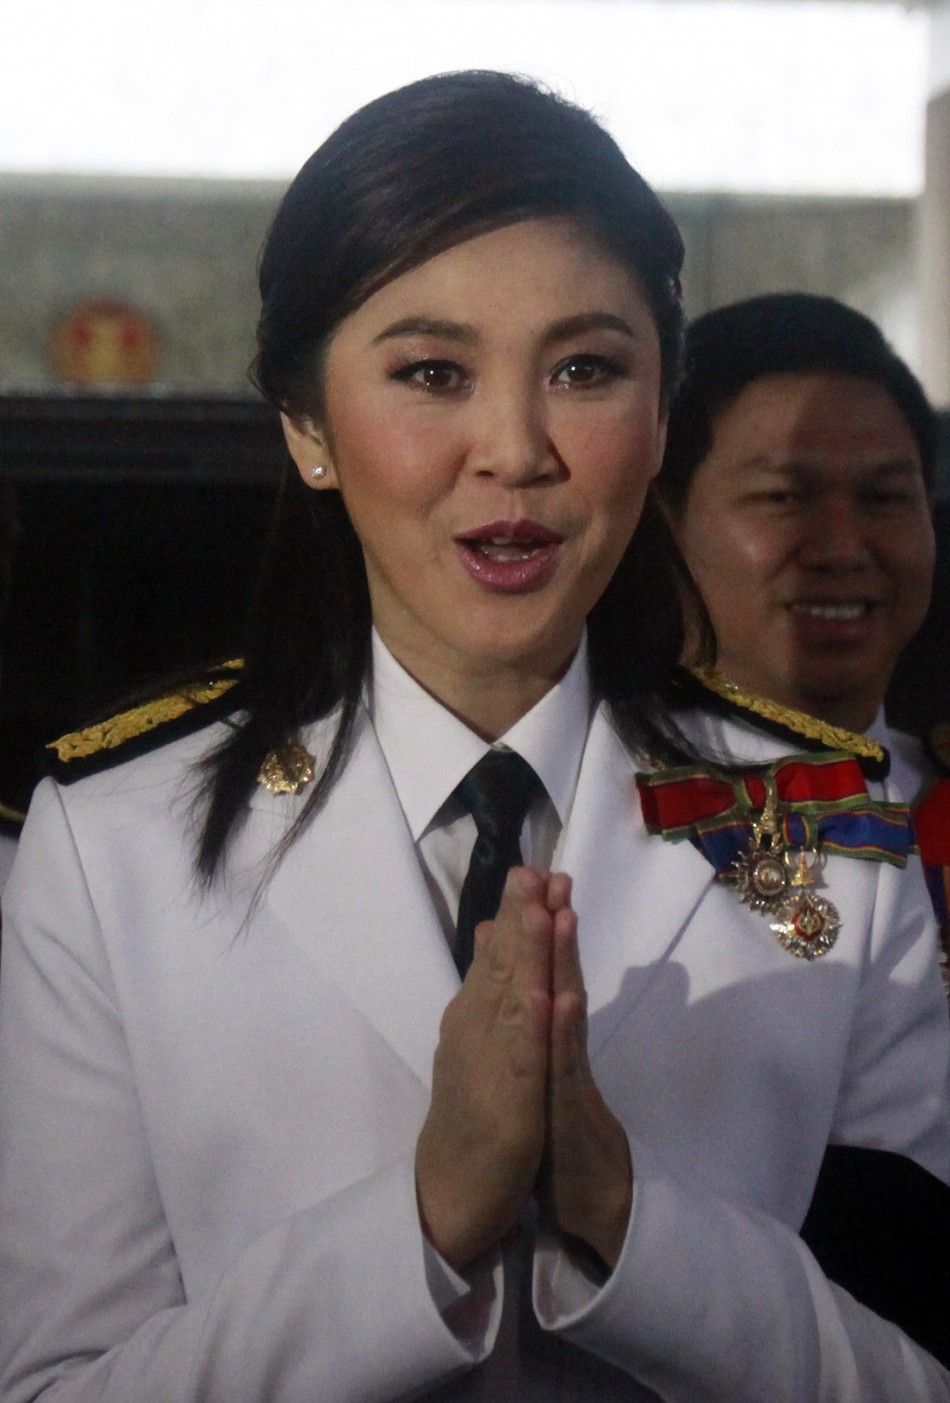 Prime Minister elect Yingluck Shinawatra of the Puea Thai Party gestures to media as she arrives at the parliament before the inauguration ceremony of the National Legislative Assembly in Bangkok